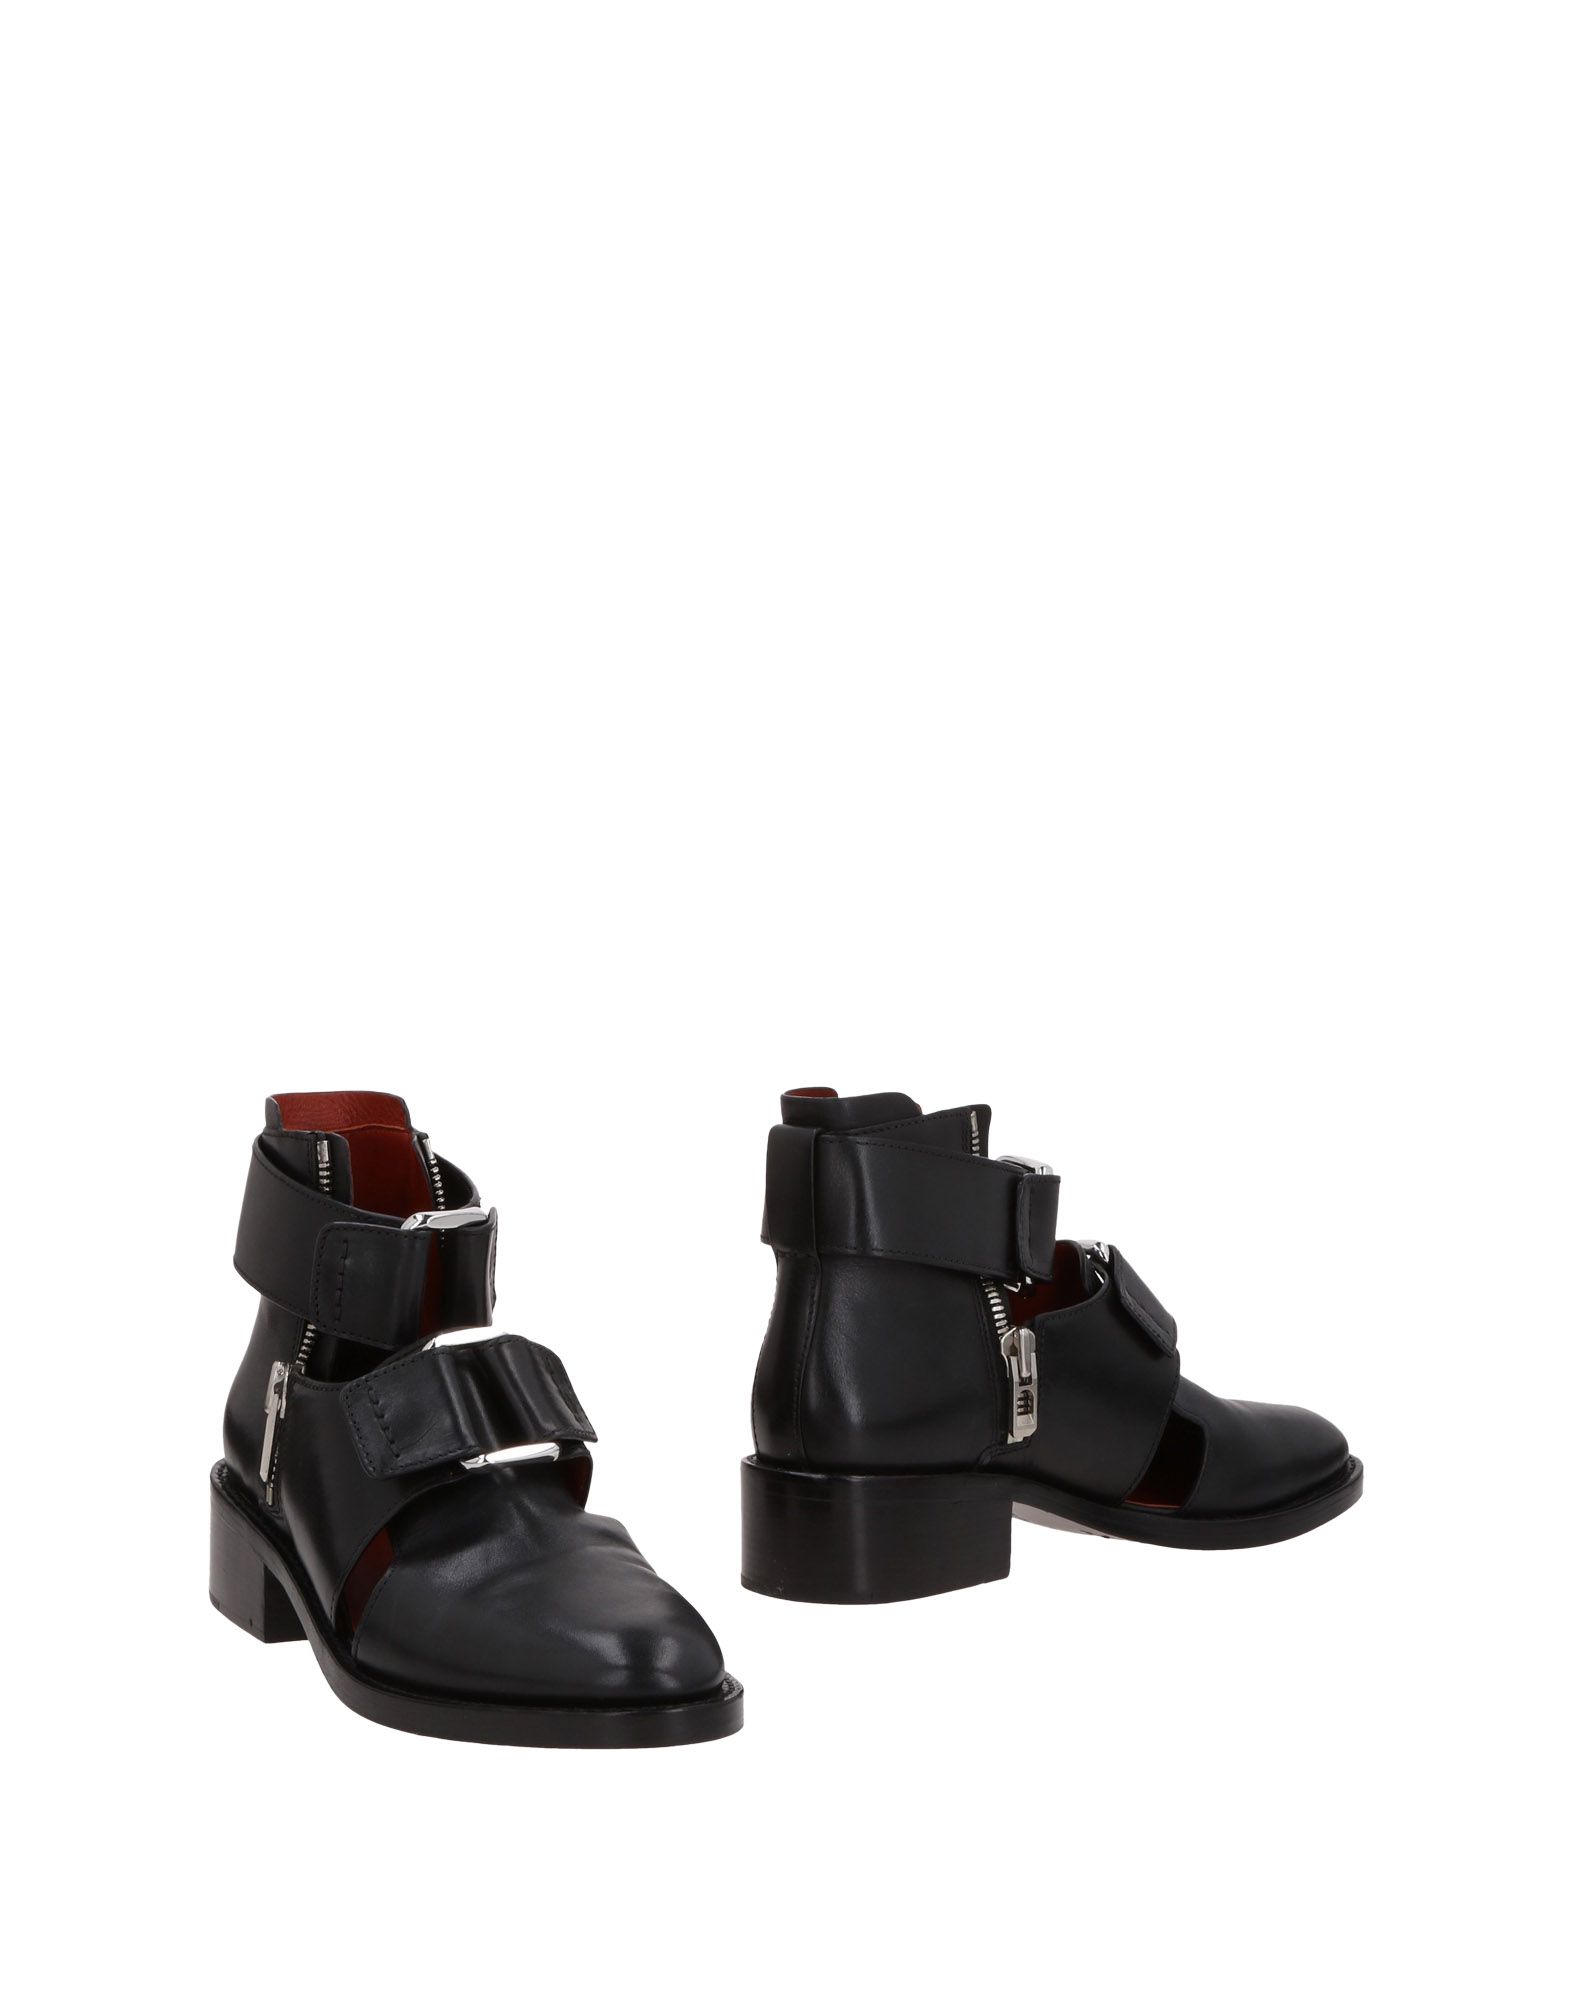 3.1 PHILLIP LIM Ankle boot,11461710AM 13